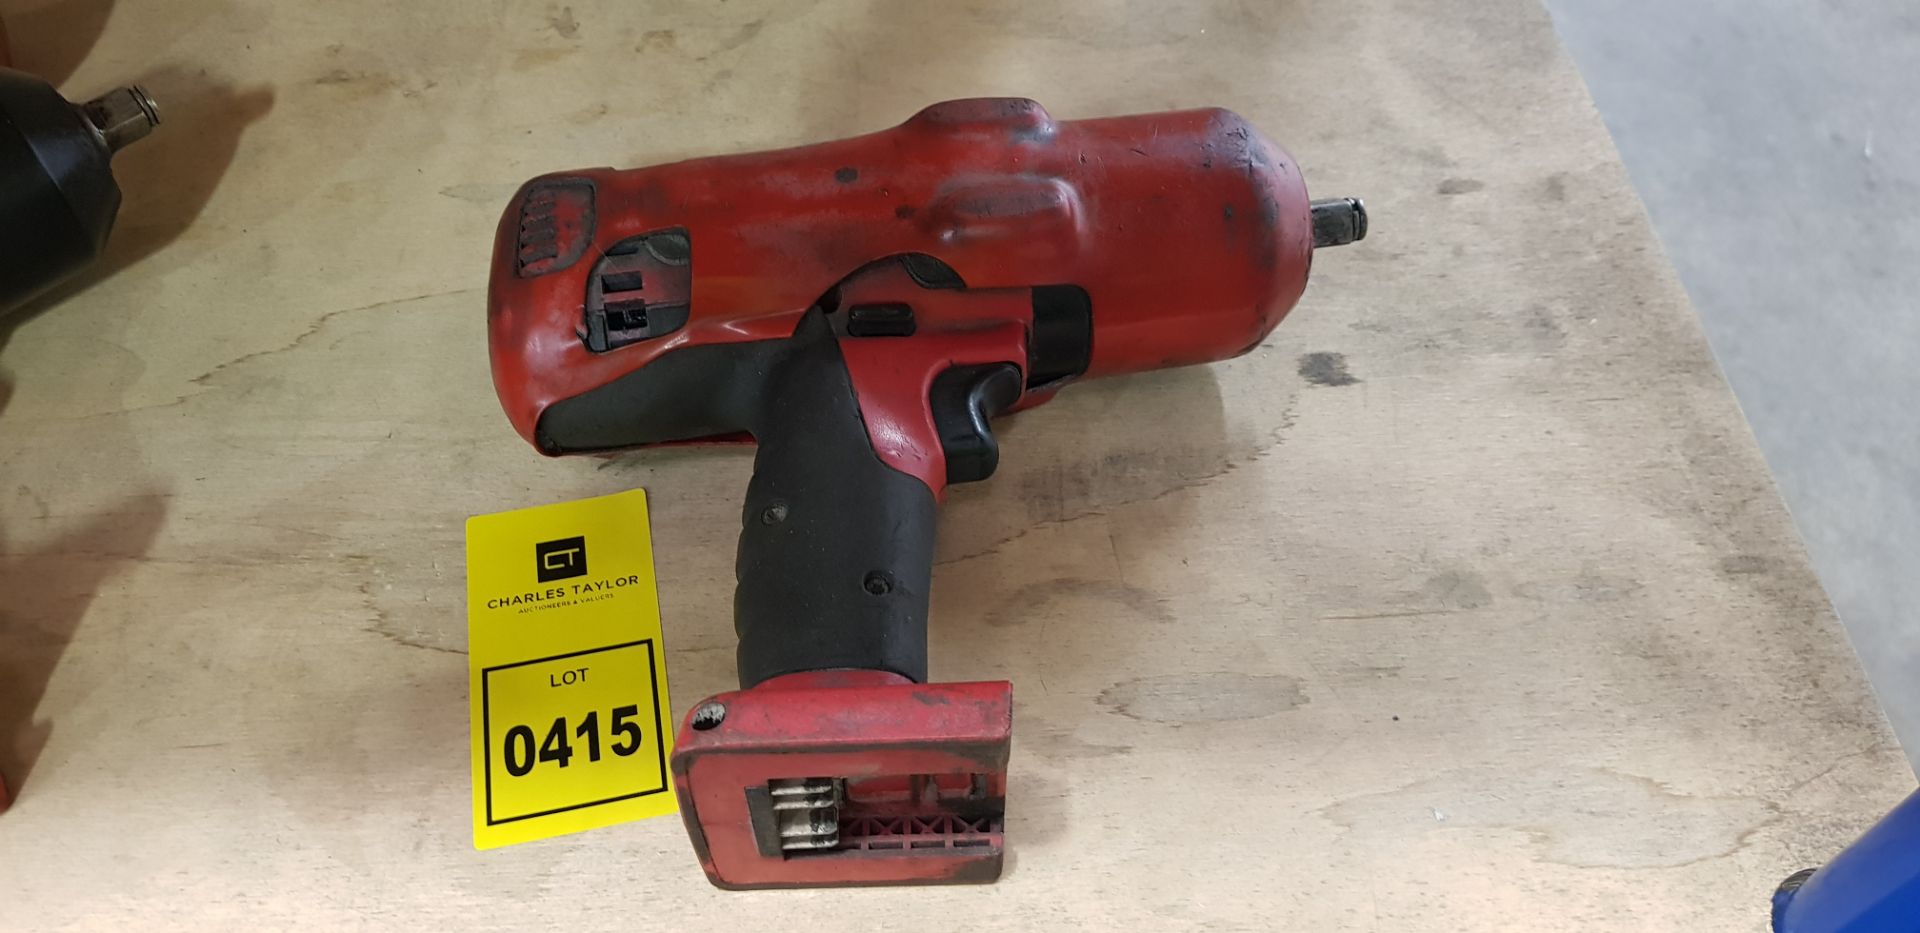 1 X USED BUT WORKING ( TESTED ) SNAP ON 1/2 INCH DRIVE IMPACT DRIVER ( MODEL CTEU8850AO) - WITH SNAP